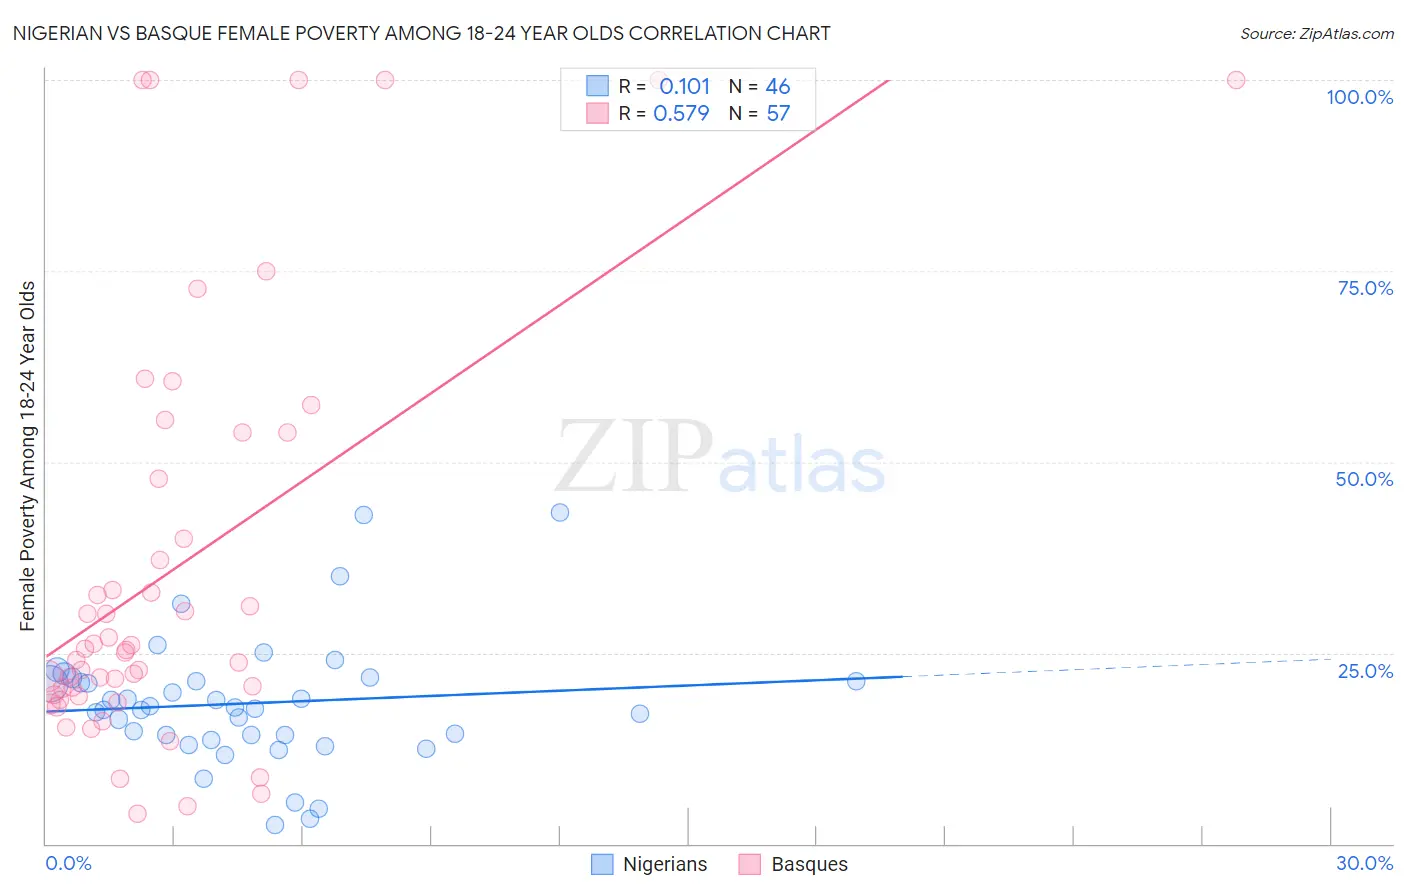 Nigerian vs Basque Female Poverty Among 18-24 Year Olds